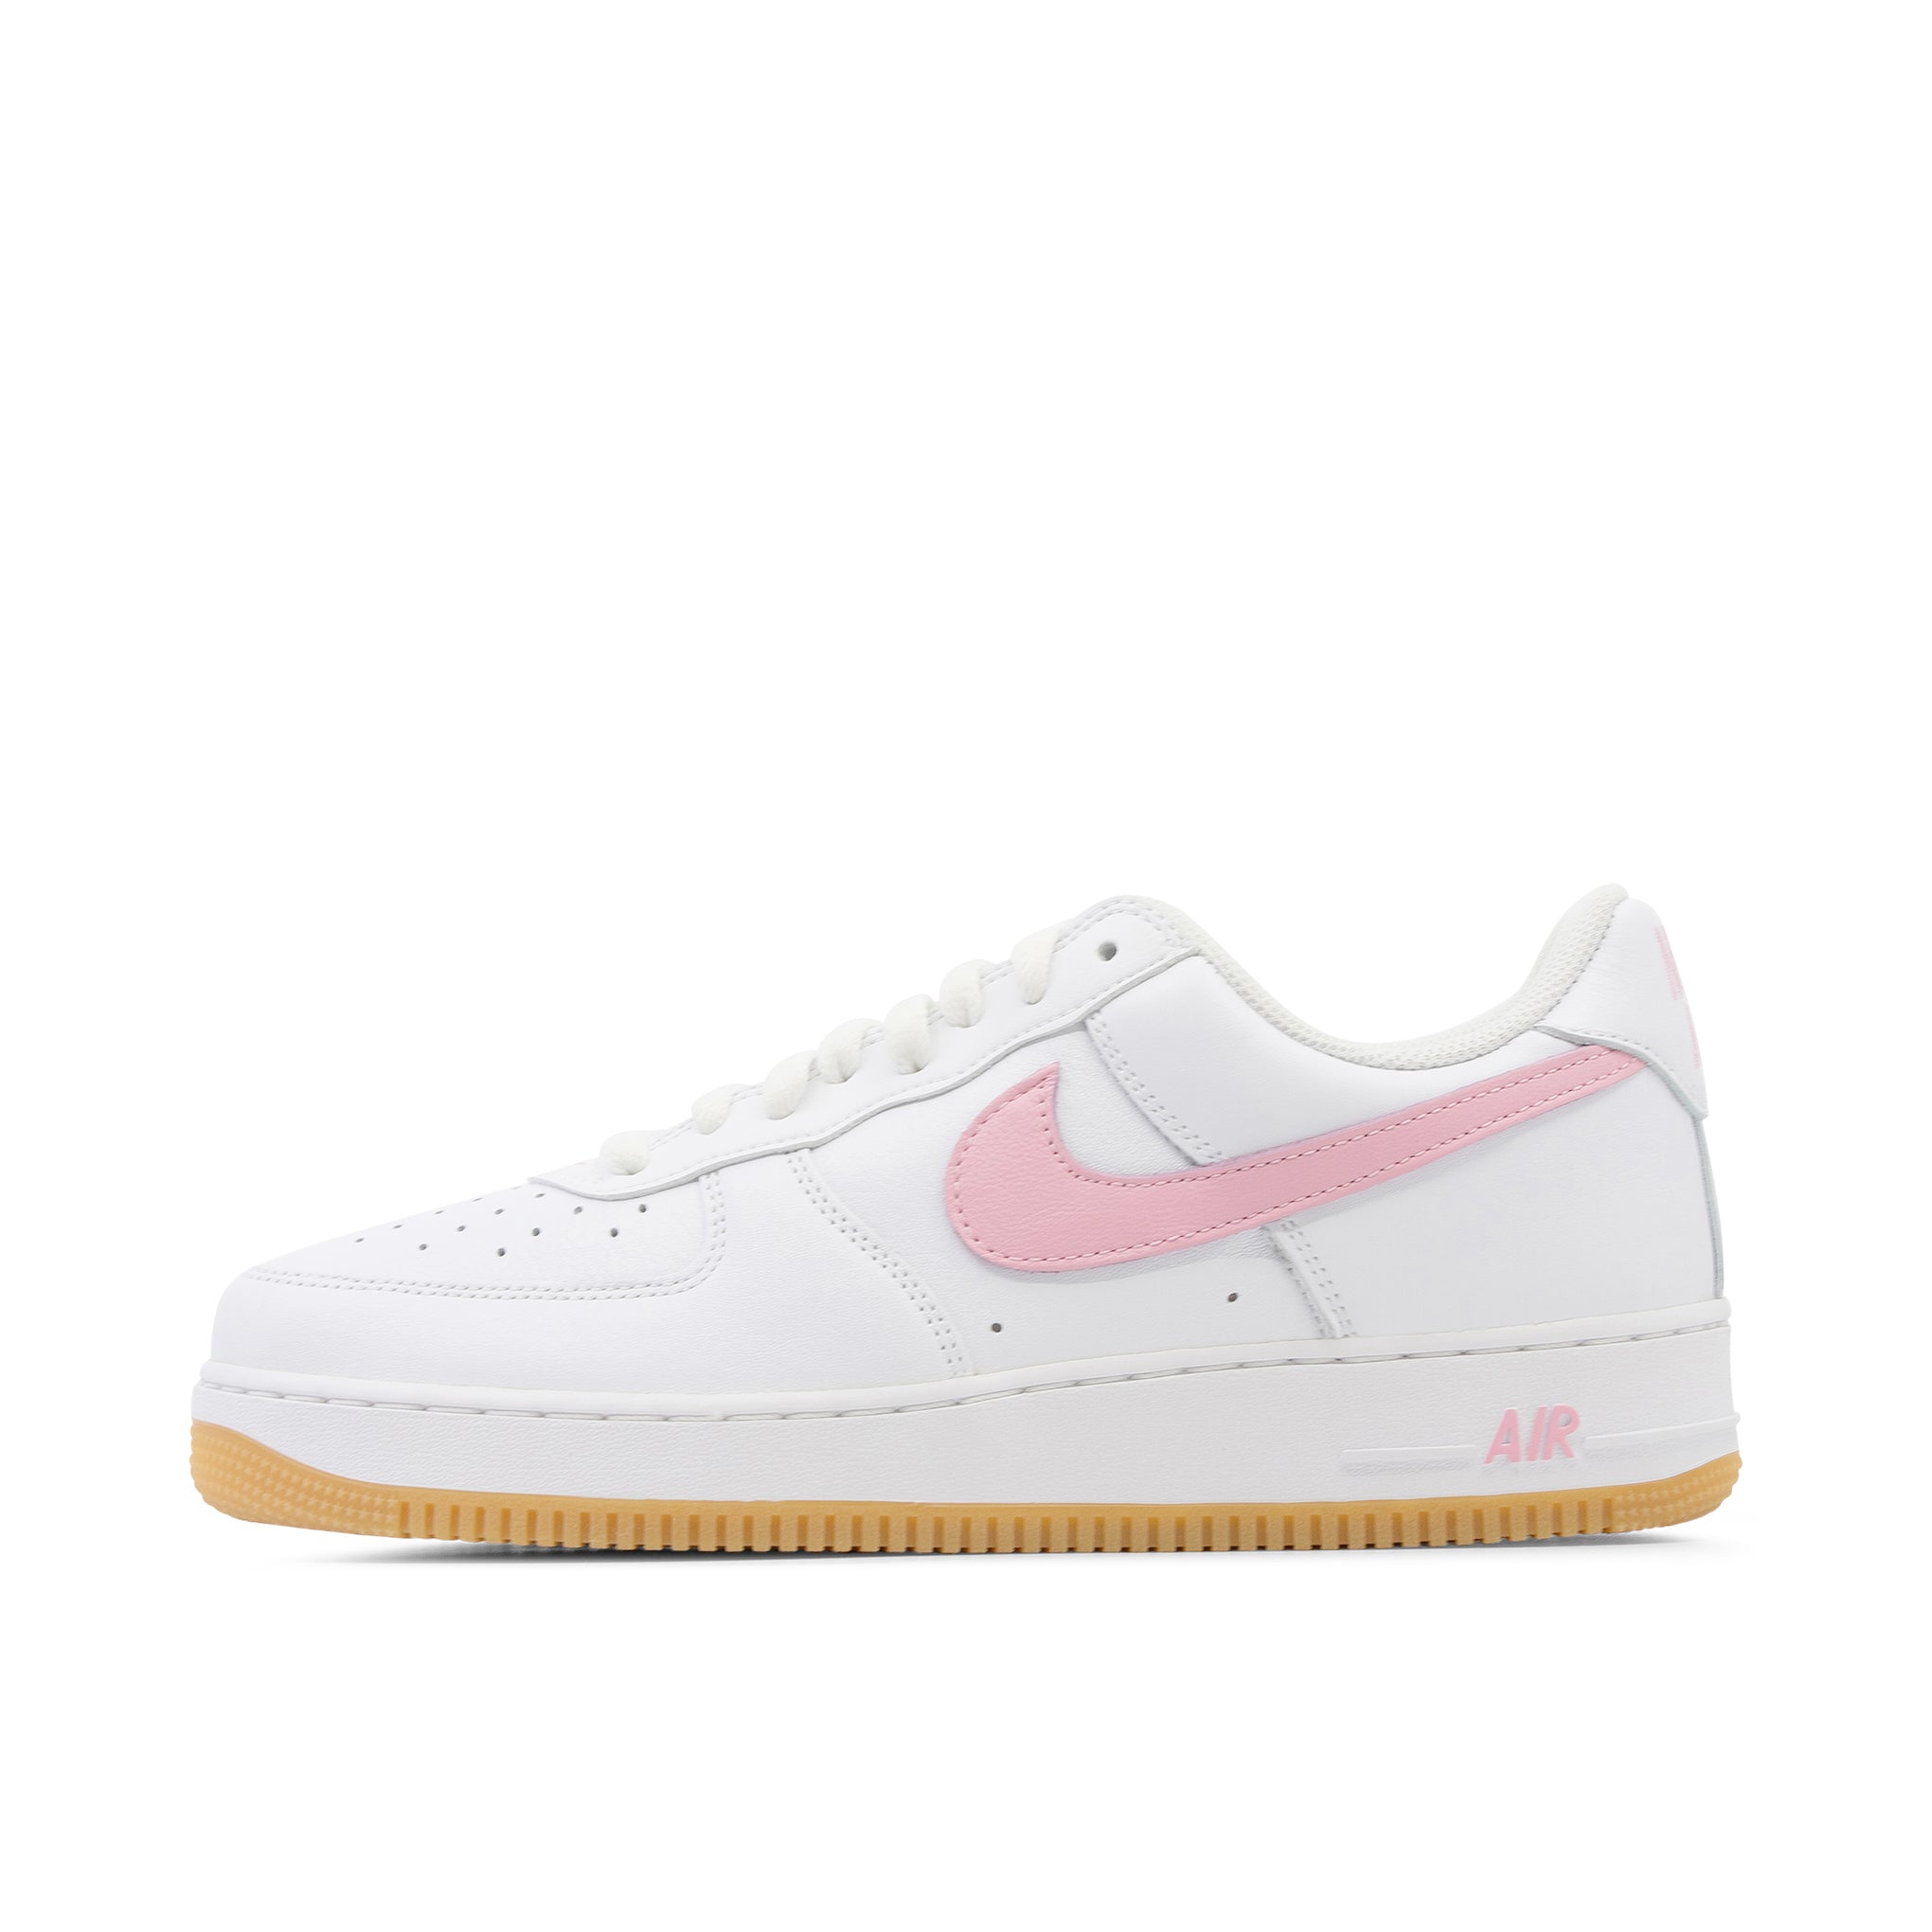 NIKE AIR FORCE 1 LOW COLOUR OF THE MONTH PINK GUM